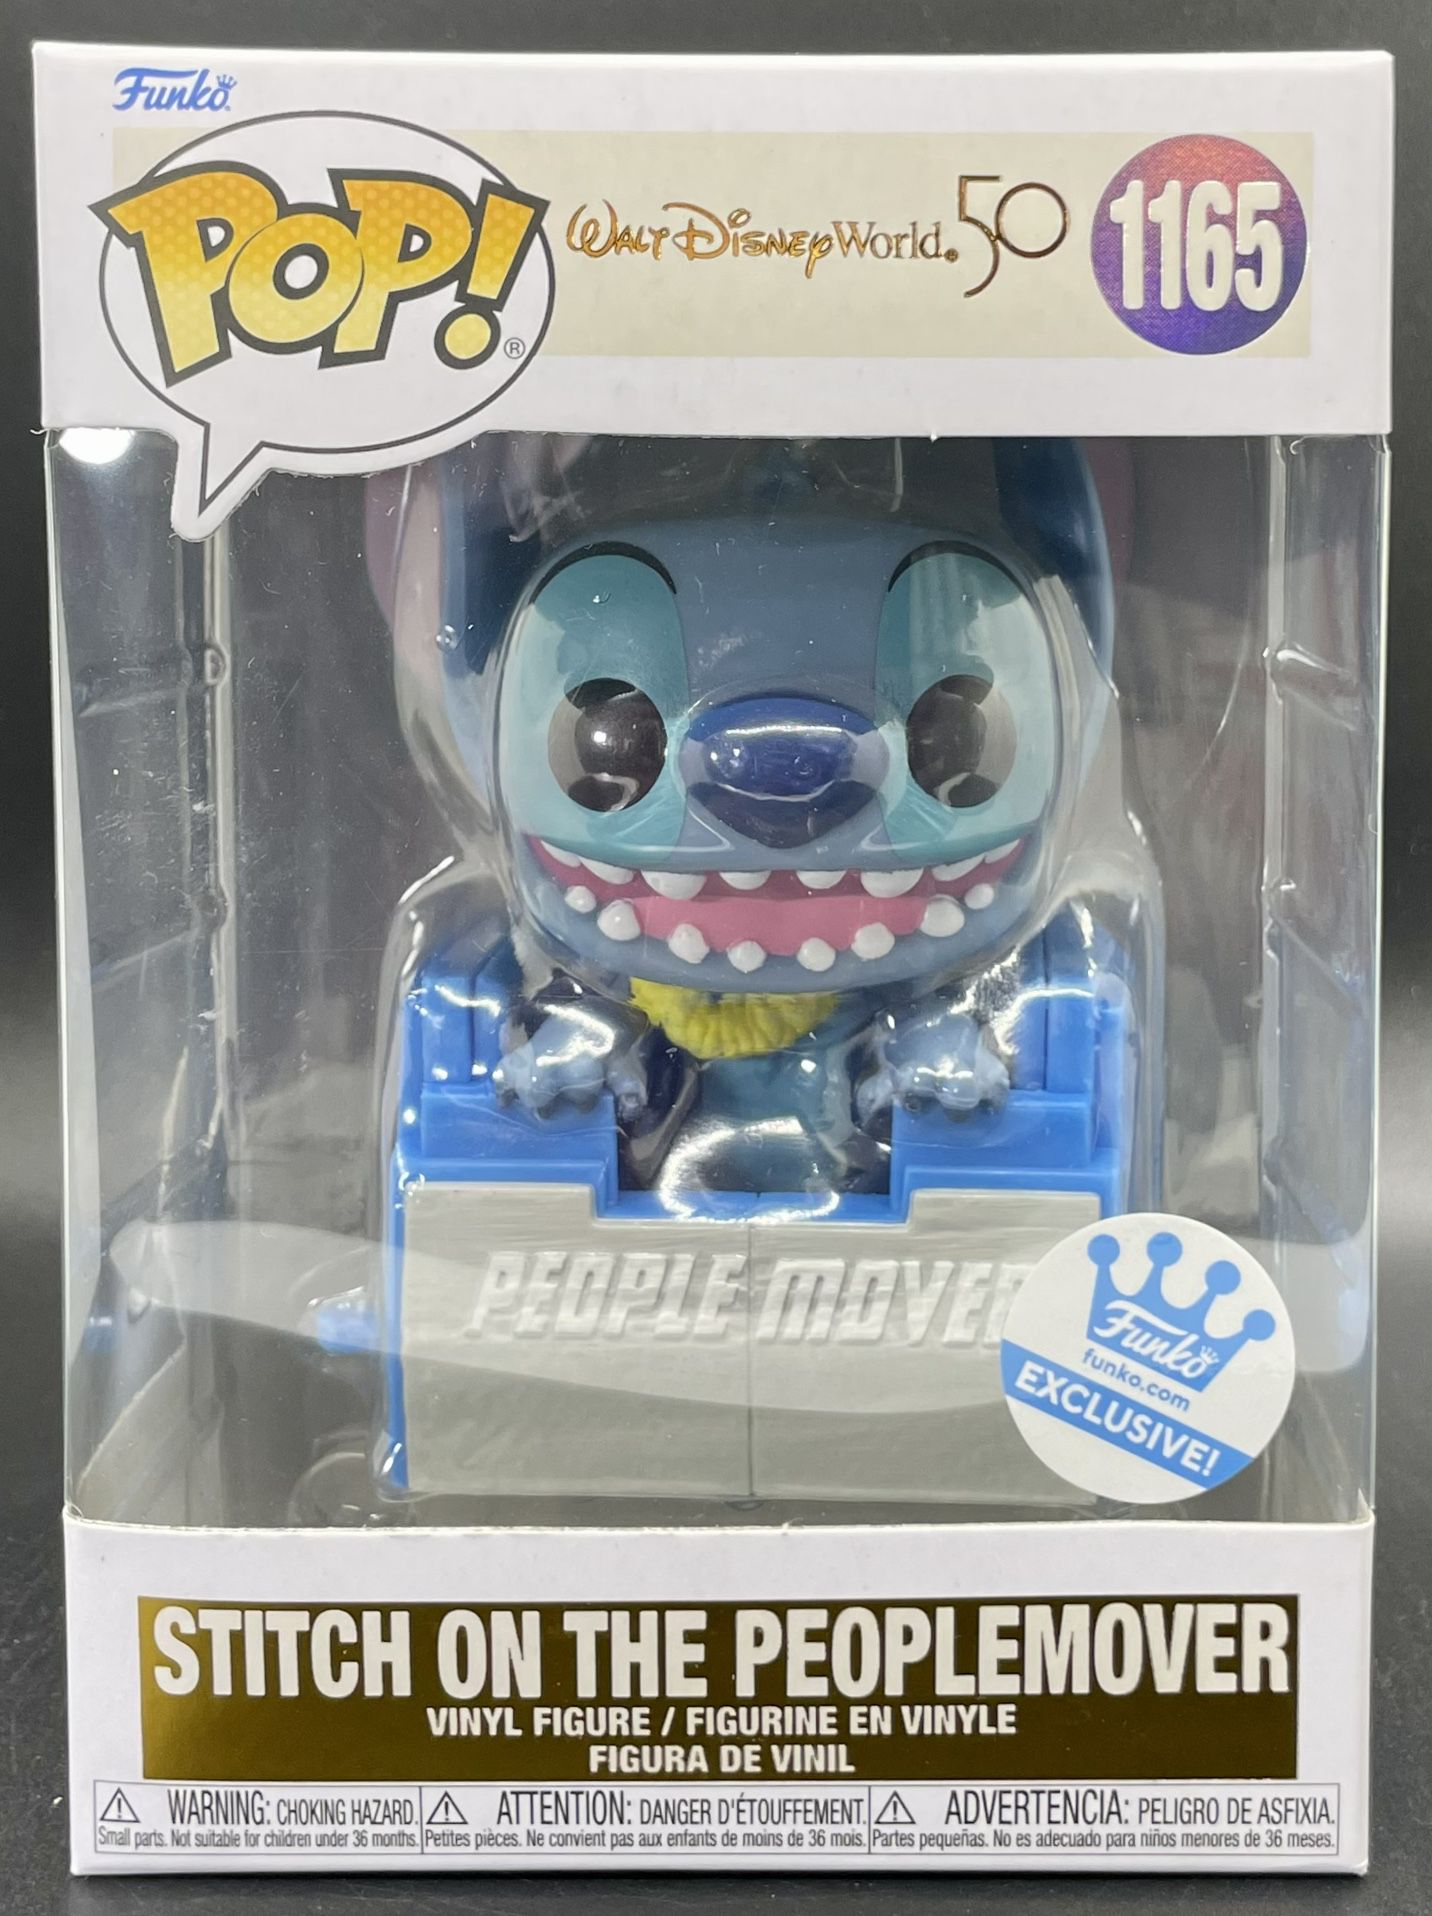 Stitch On Peoplemover Funko Pop shop exclusive